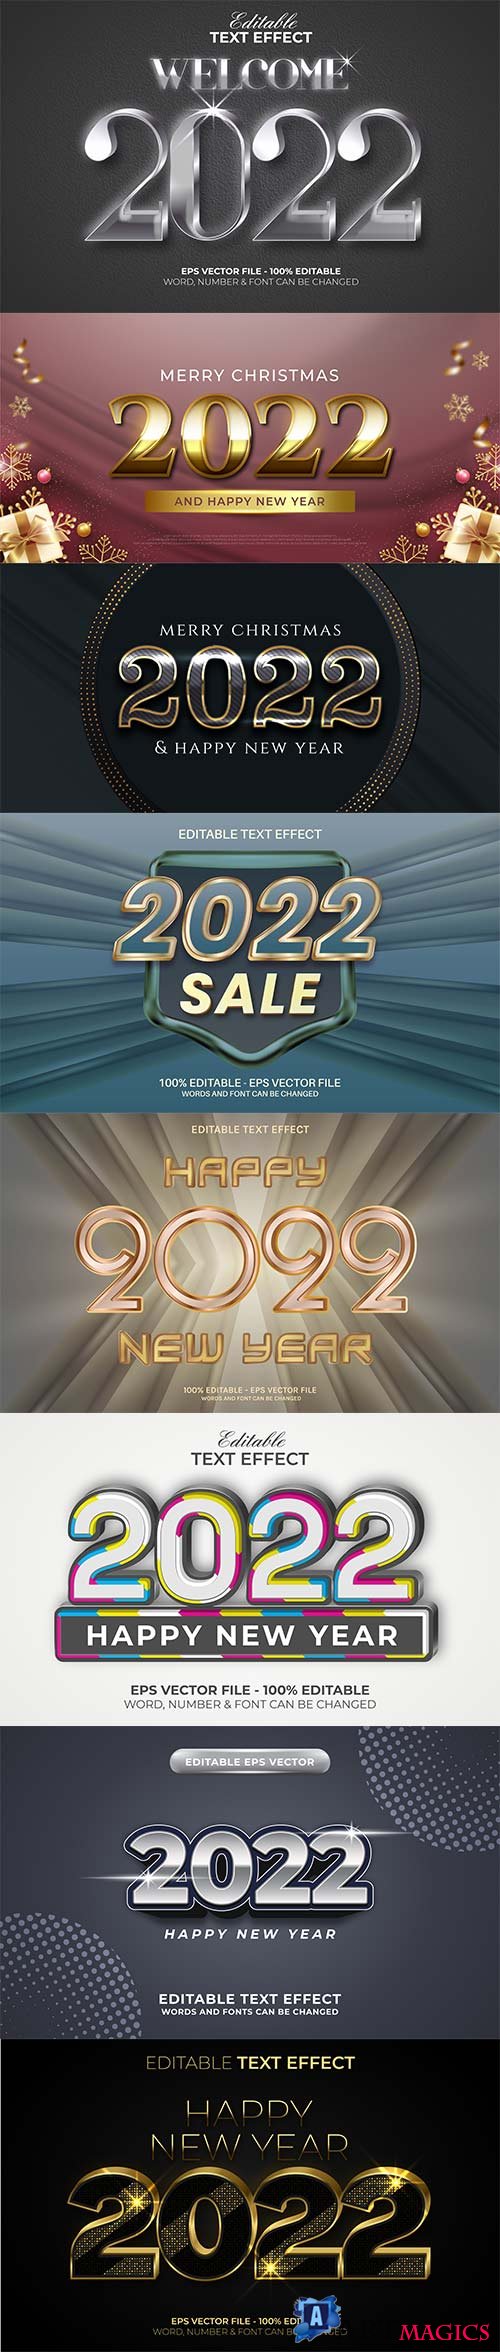 2022 New year and christmas editable text effect vector vol 40